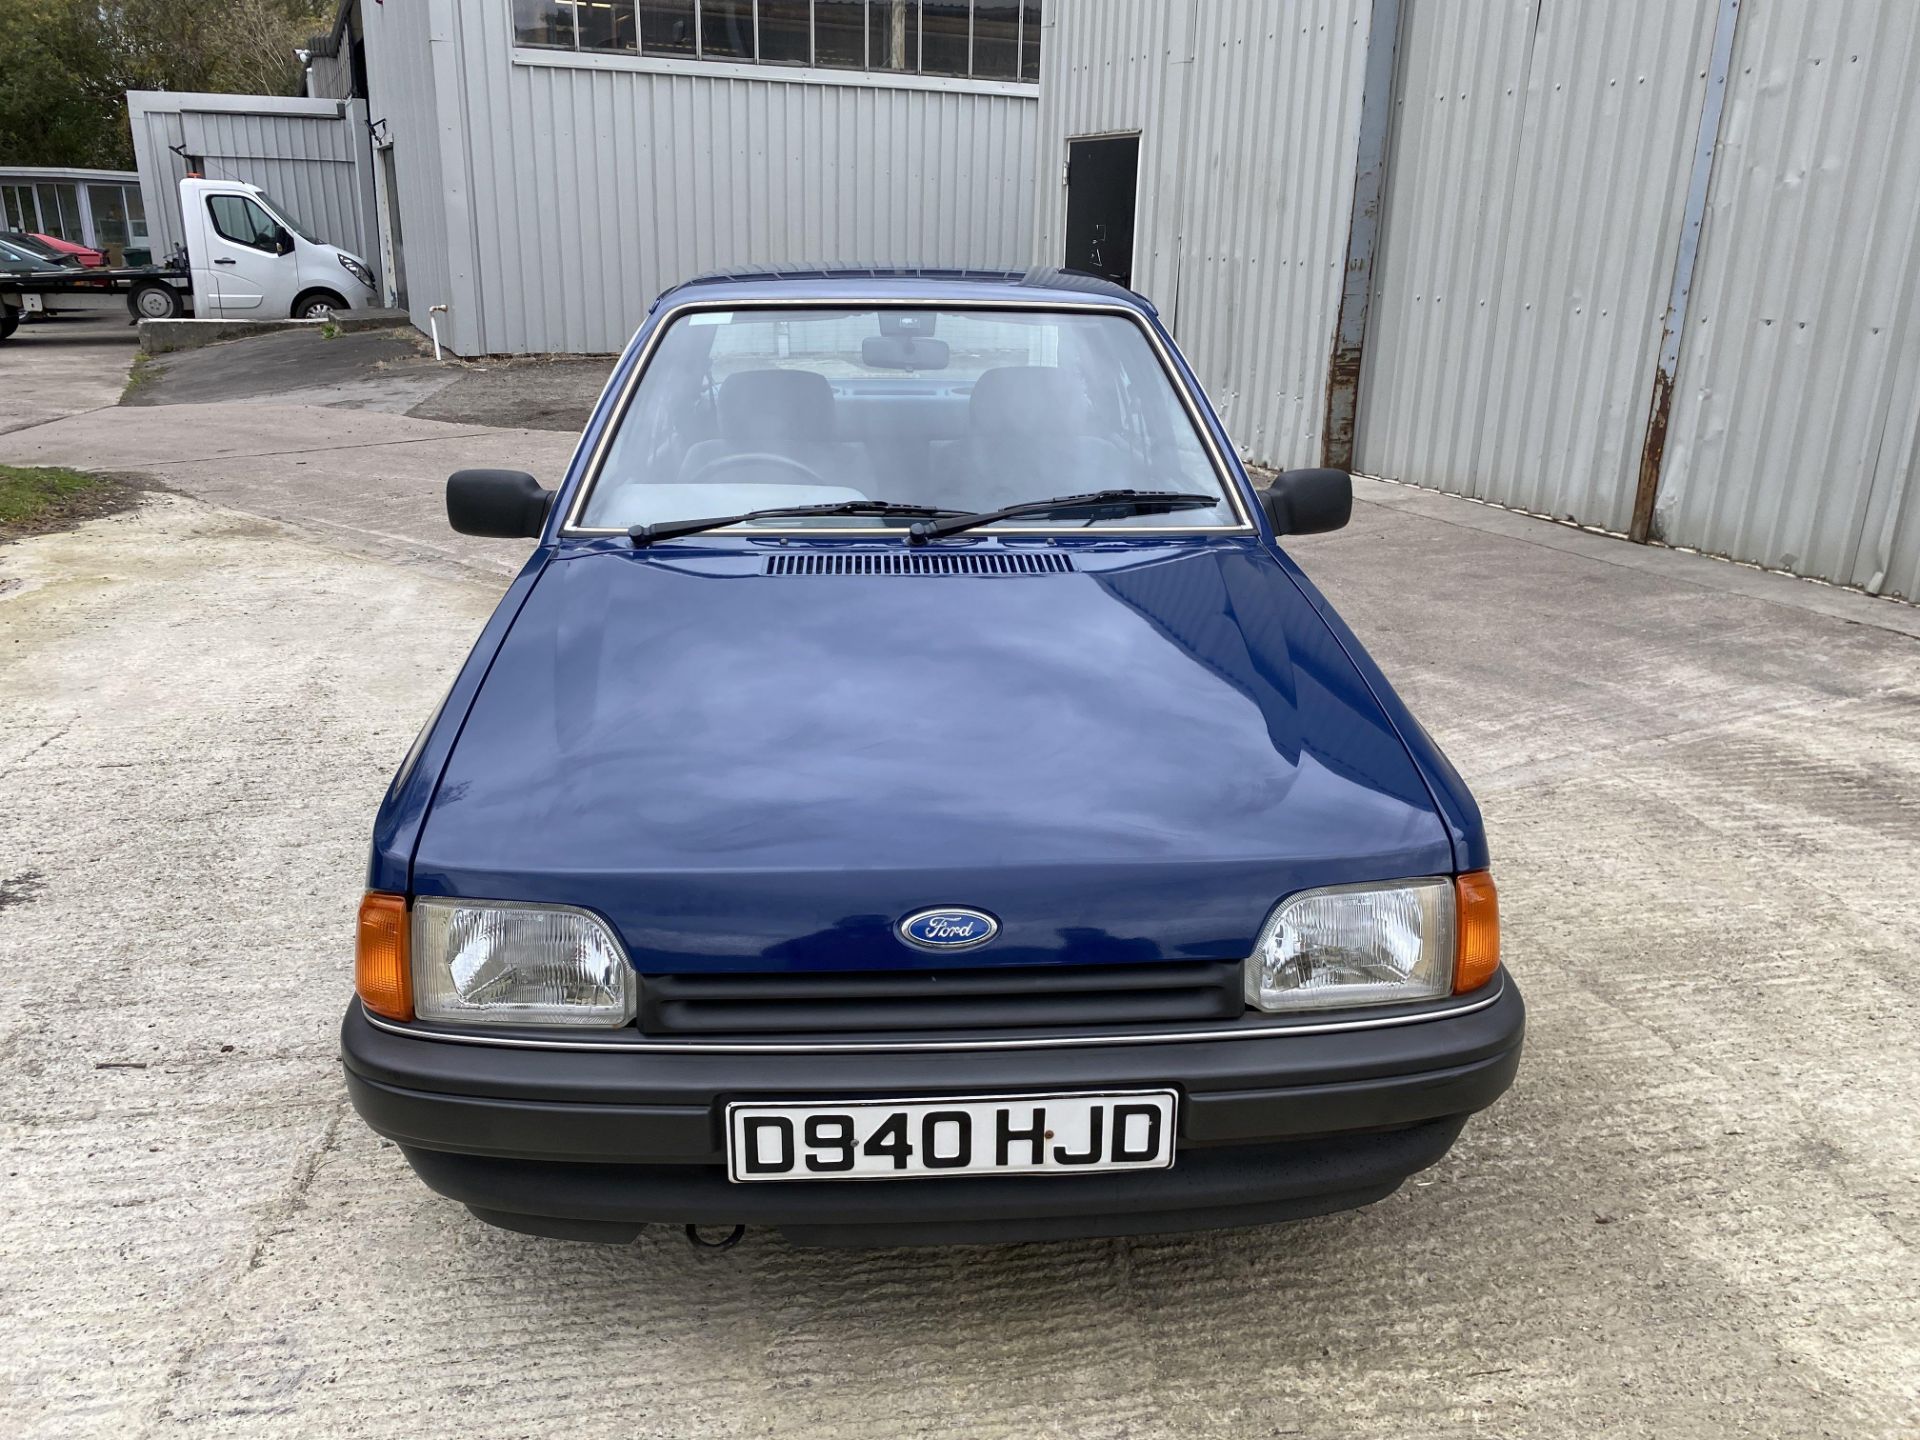 Ford Orion 1.6 GL - Image 10 of 42